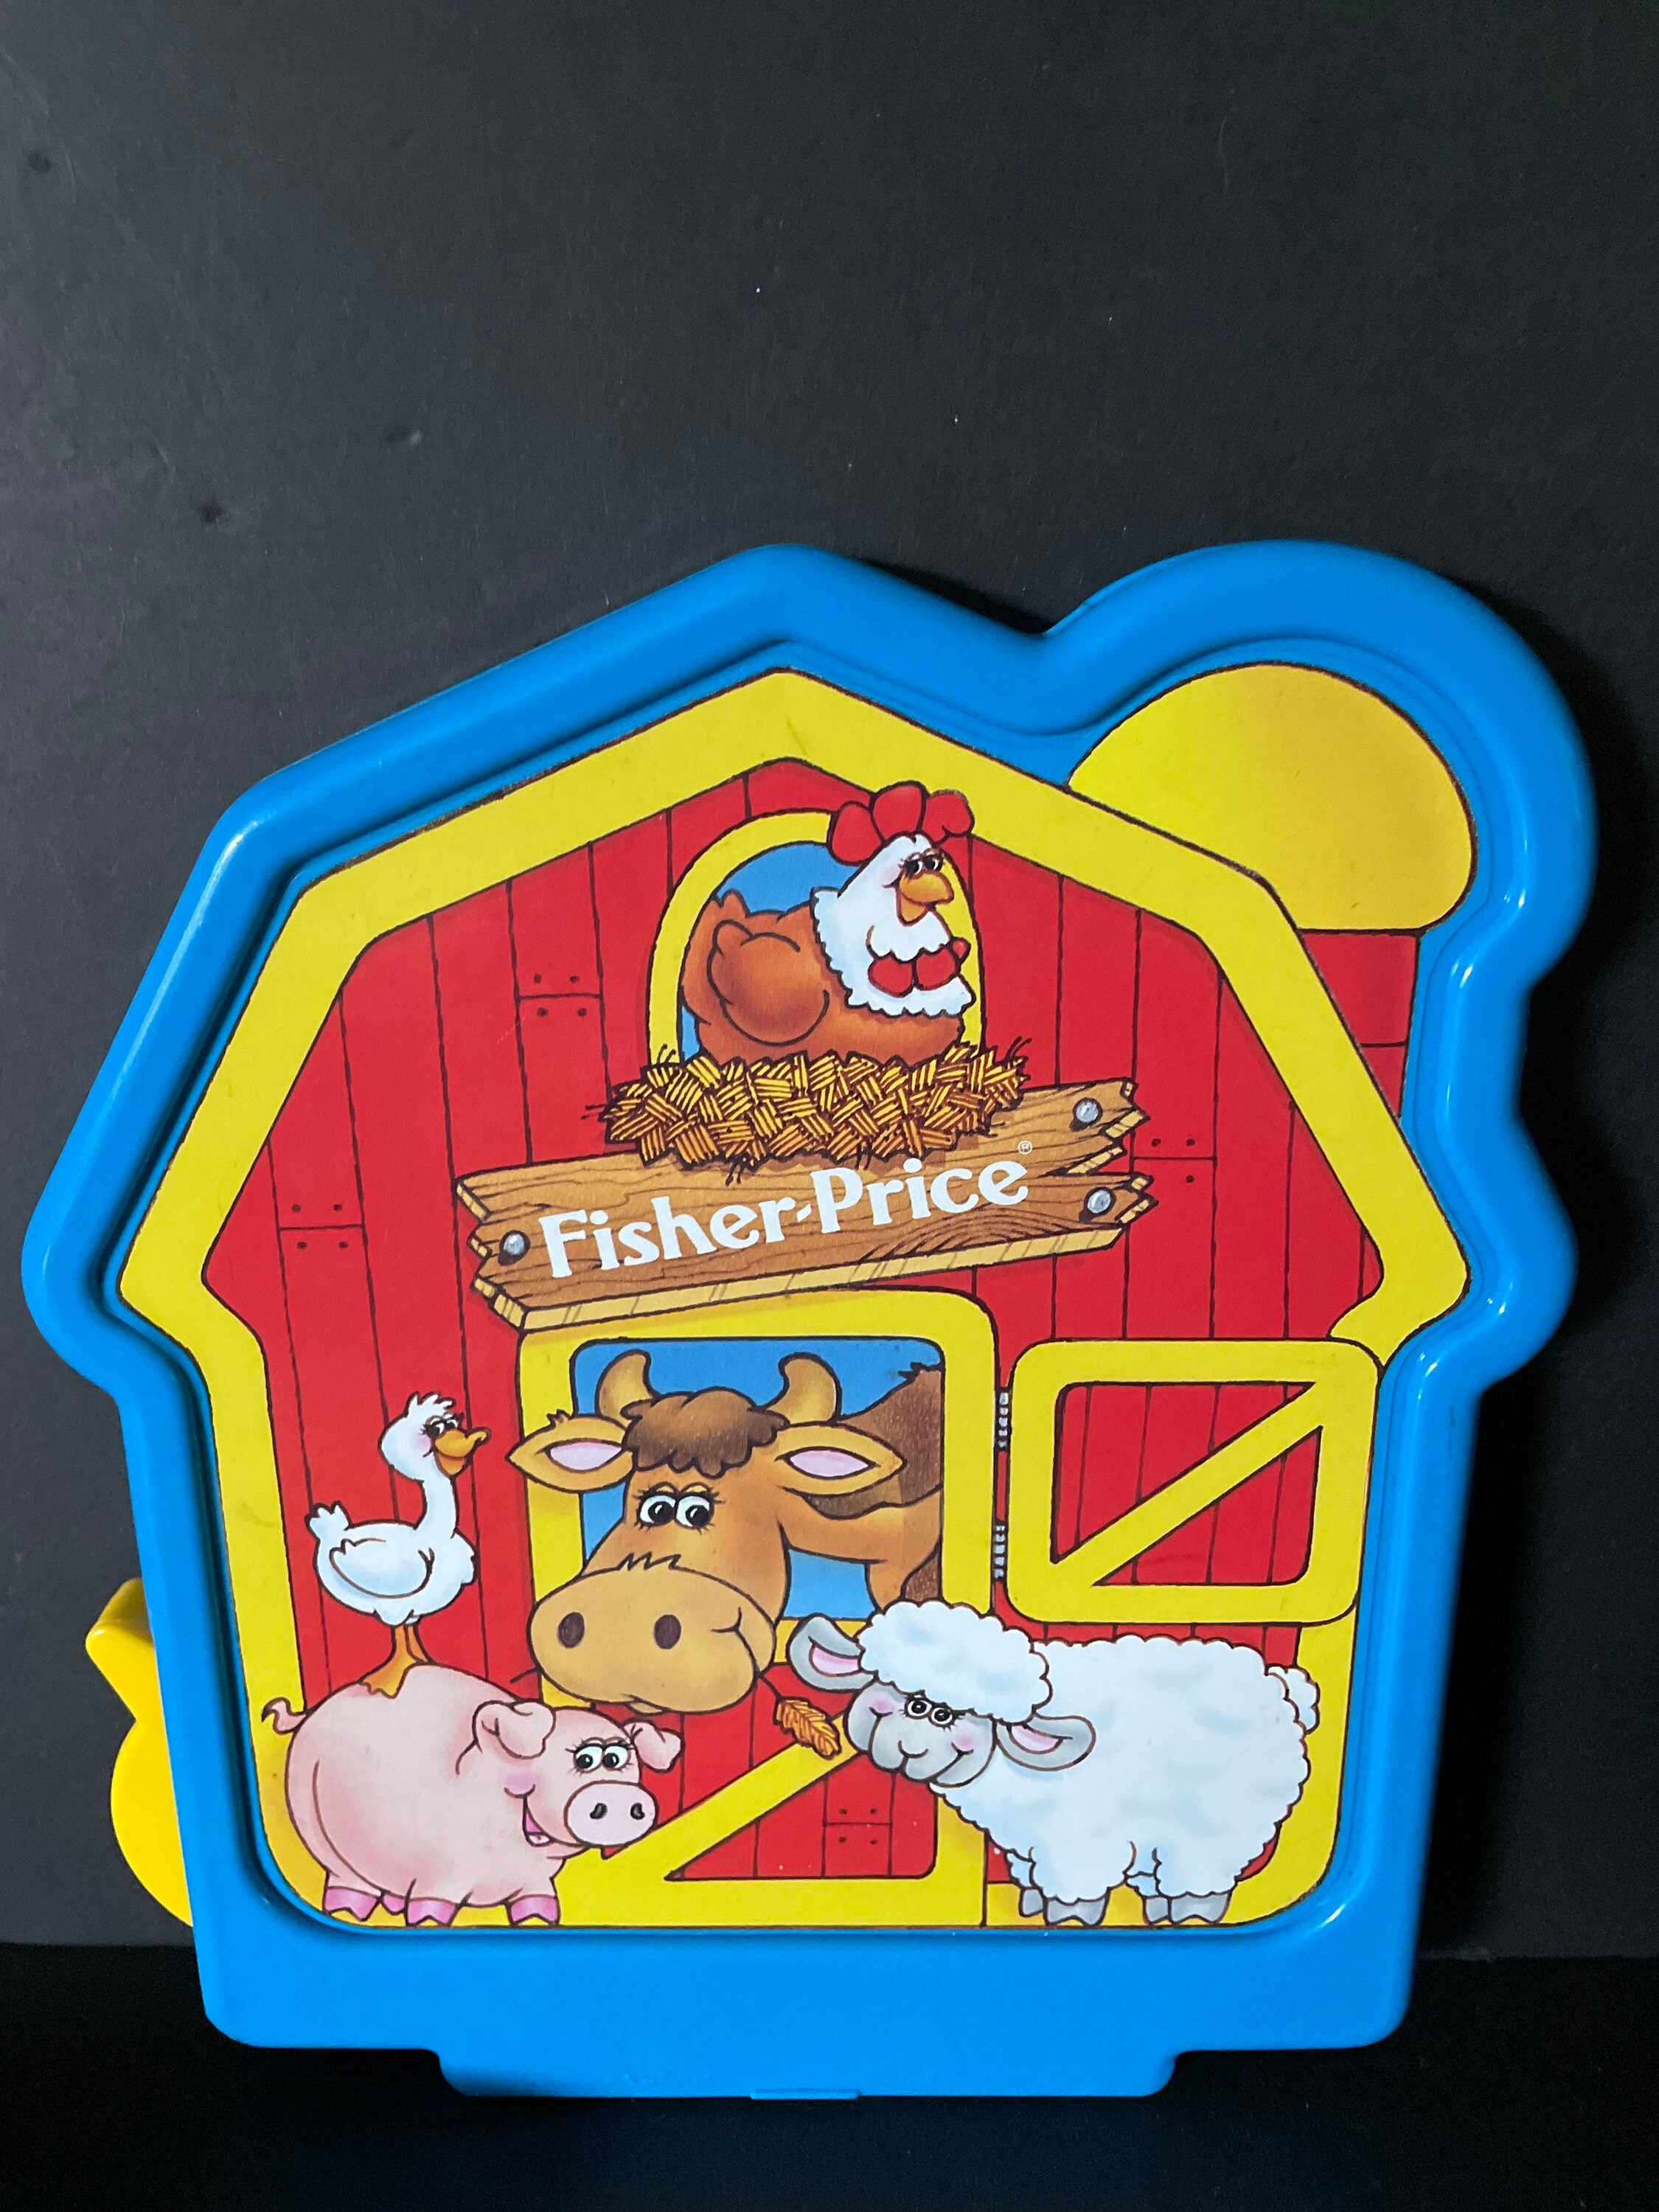 Cow Sheep or Pig Chicken Fisher Price Barnyard Bingo Replacement Coin Chip 